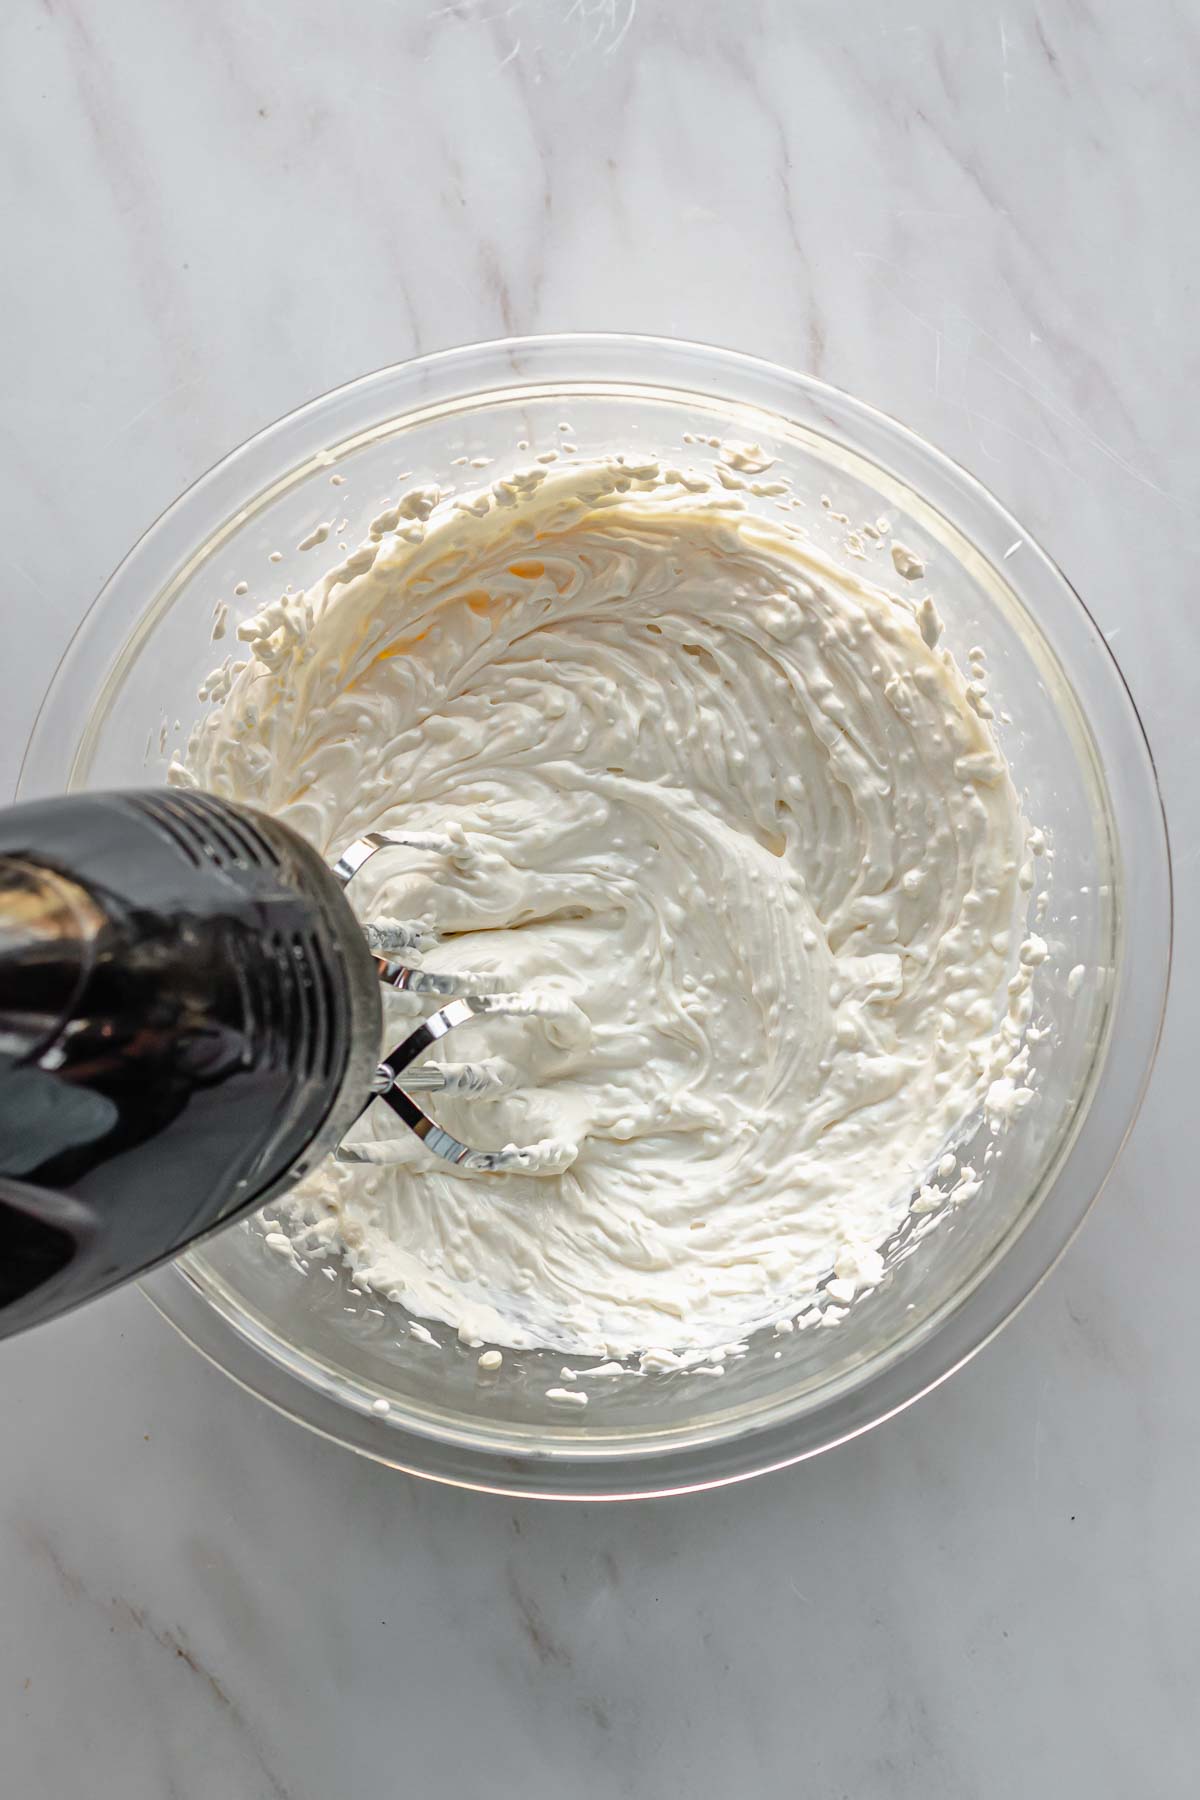 A hand mixer mixes together the wet ingredients in a bowl.